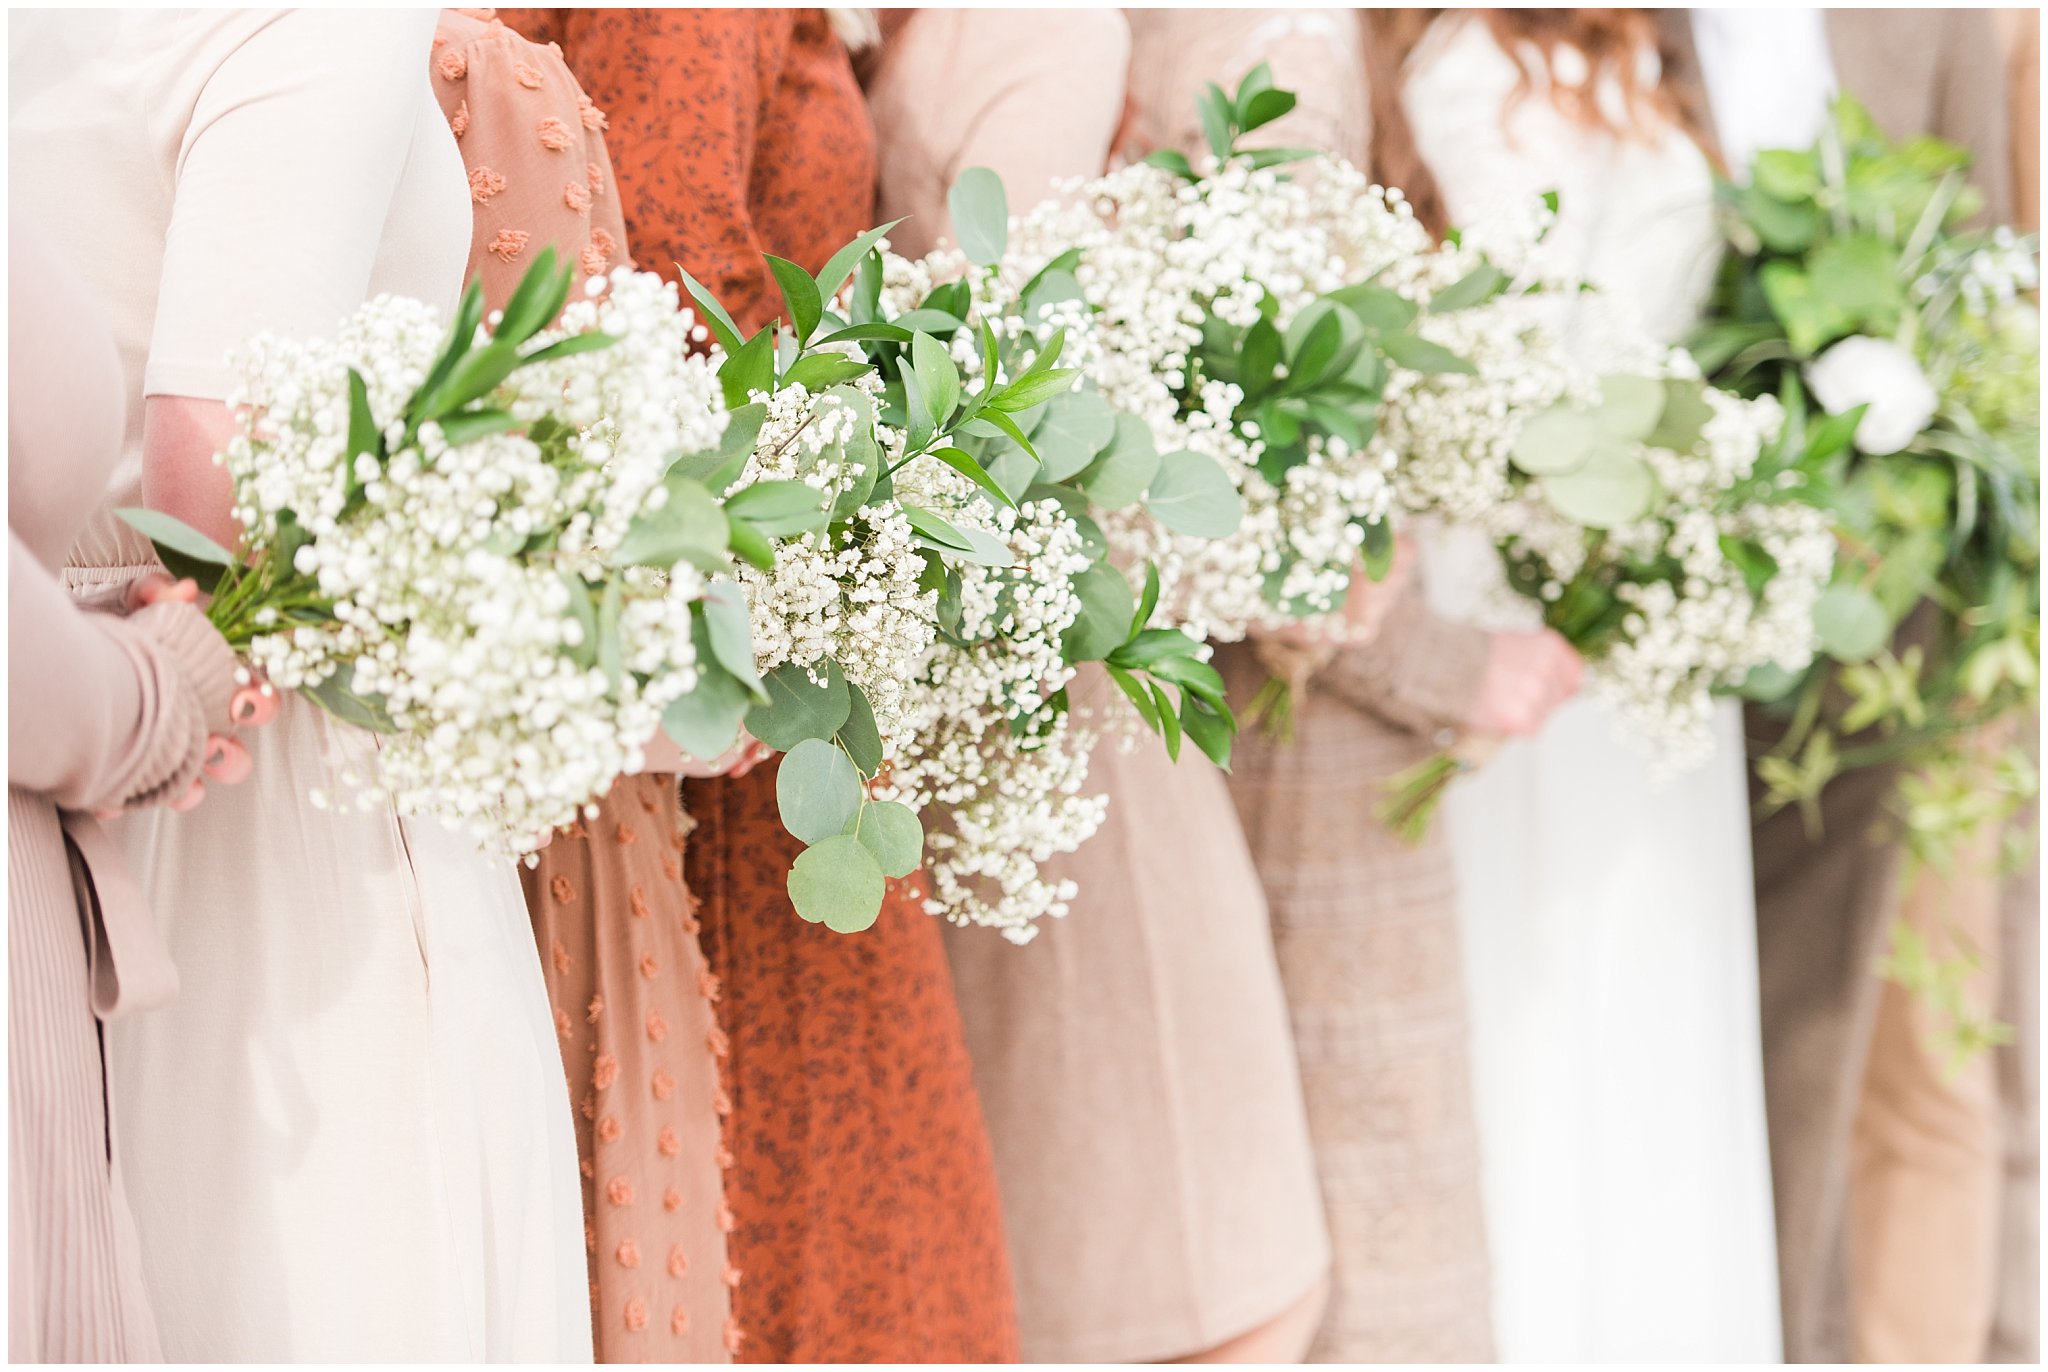 Bridesmaid portraits and green and white florals during Ogden Temple winter wedding | Brown, Emerald Green, and white wedding | Ogden Temple and Sweet Magnolia Wedding | Jessie and Dallin Photography